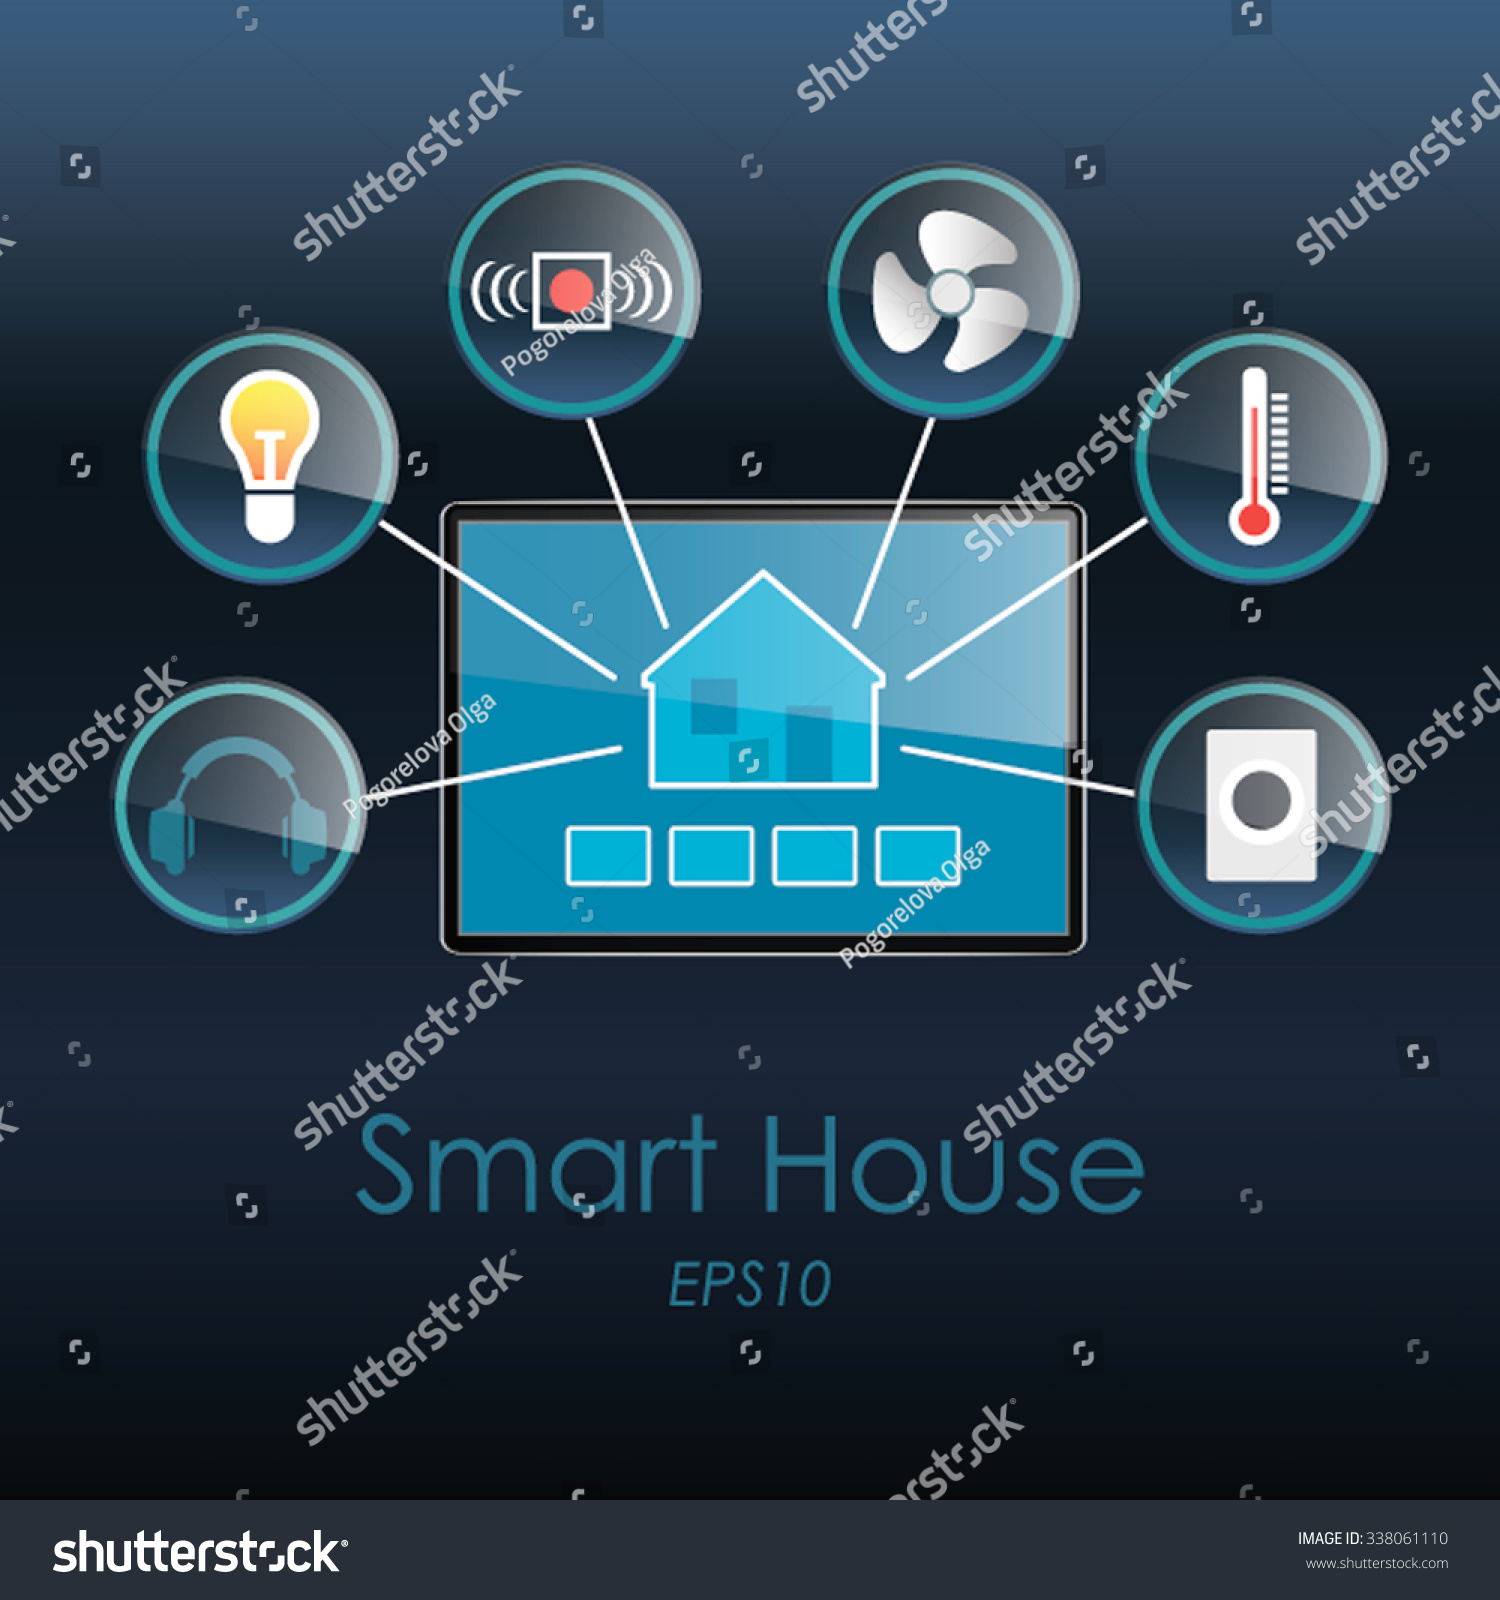 home automation clipart - photo #40